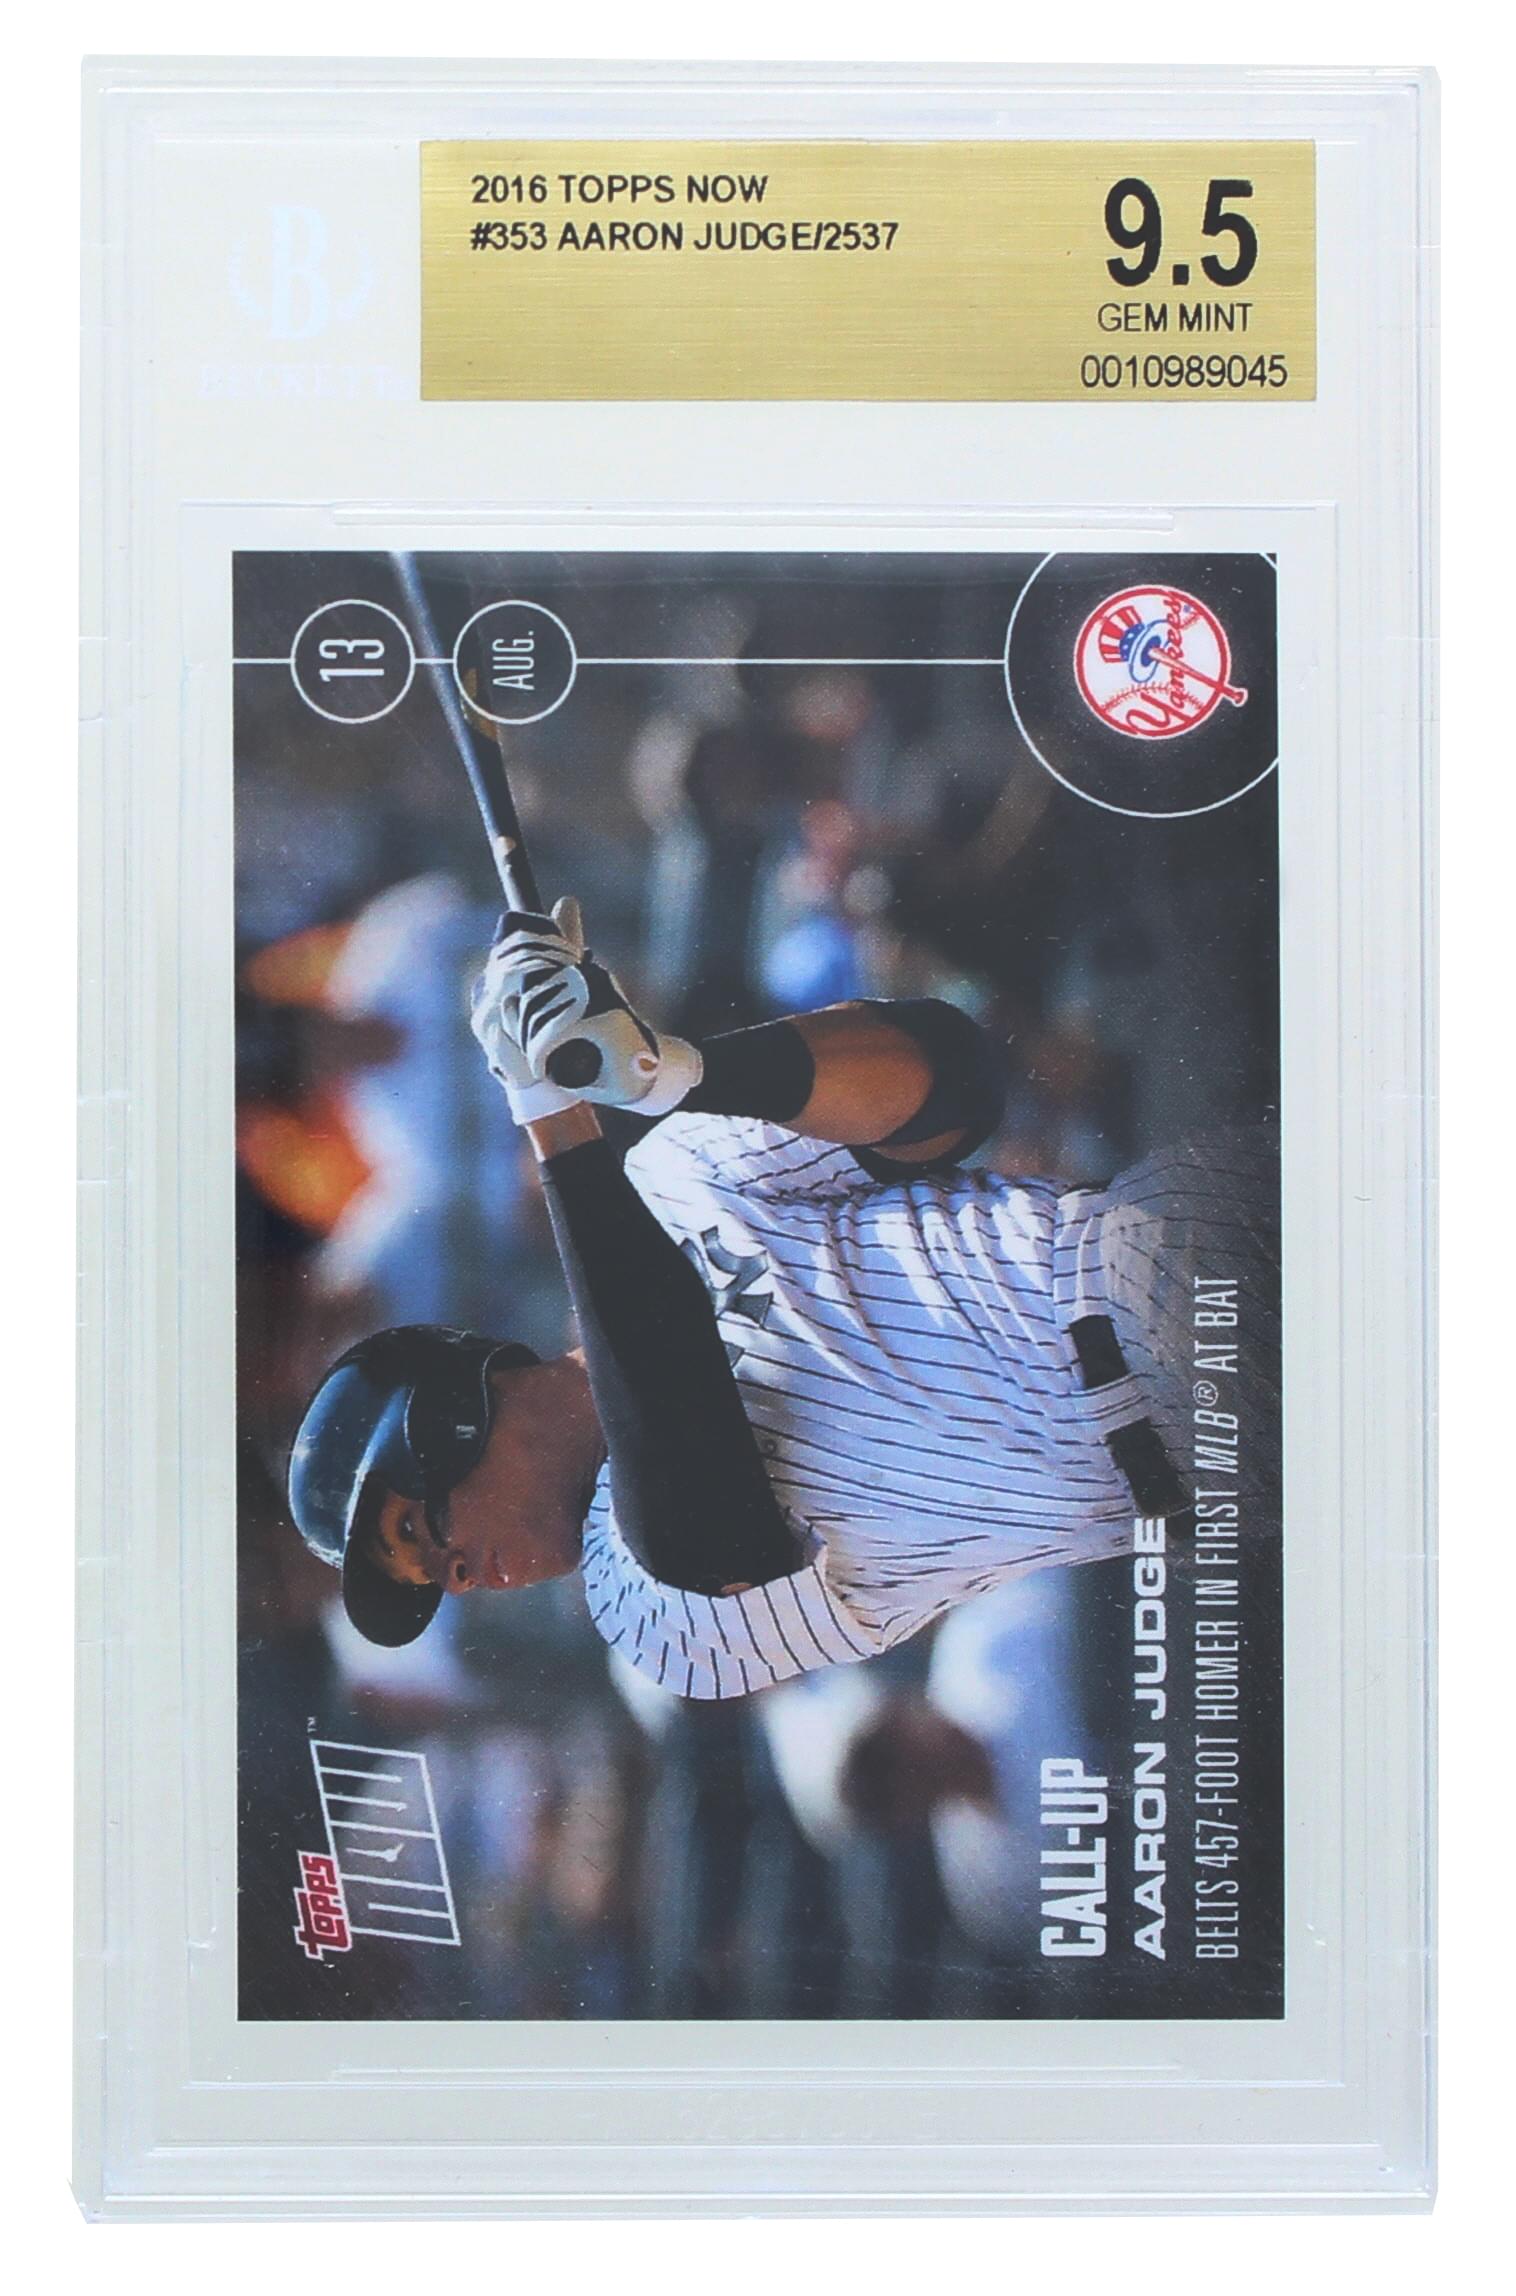 Aaron Judge New York Yankees 2016 Topps Now Rookie Card #356 BGS 9.5